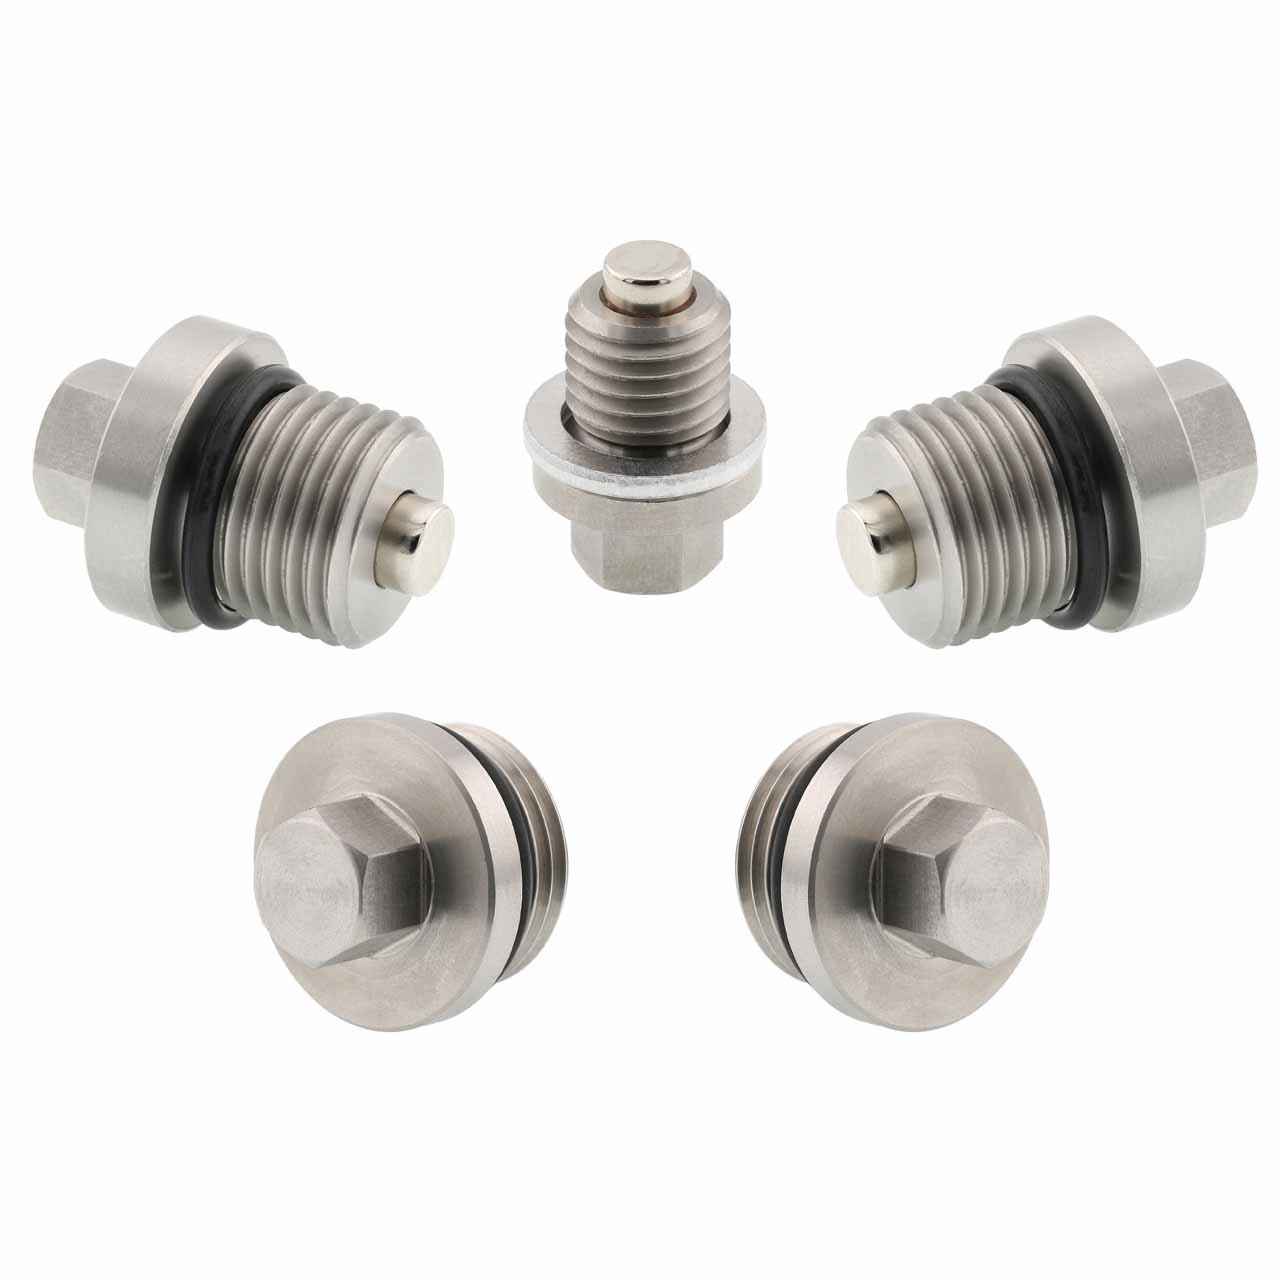 Polaris RZR Turbo S Magnetic Oil Drain Plug Kit - 2021-2022 - Engine, Transmission, Differential - Made In USA